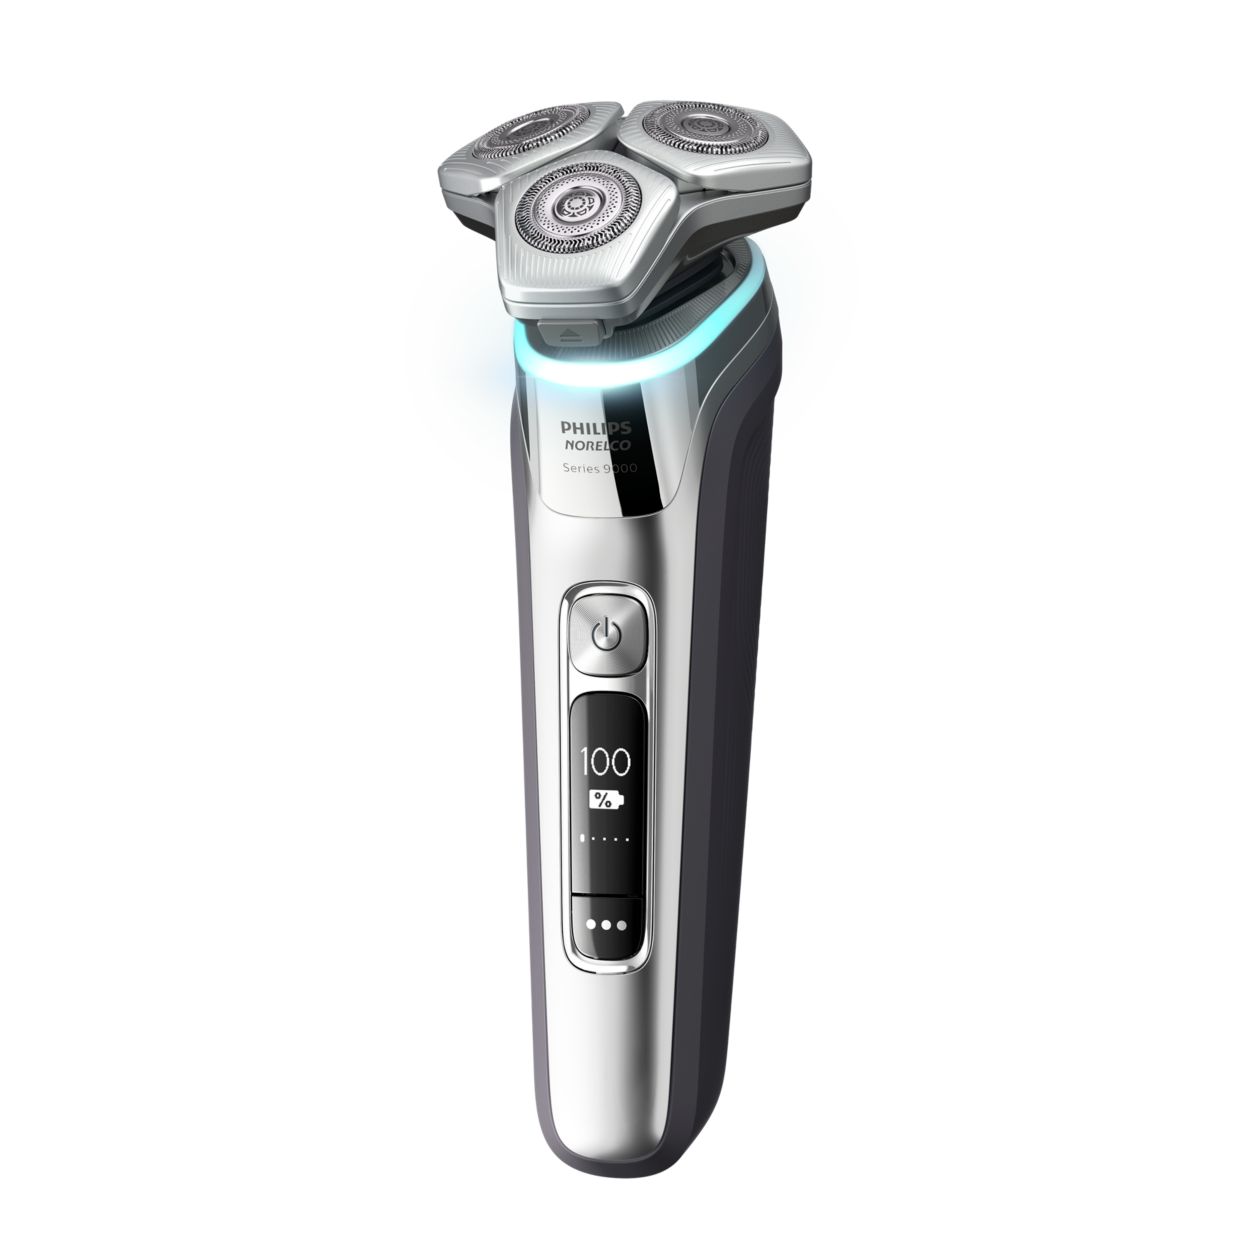 Philips Series & Norelco 9000 Shaver Wet Dry Electric Shaver